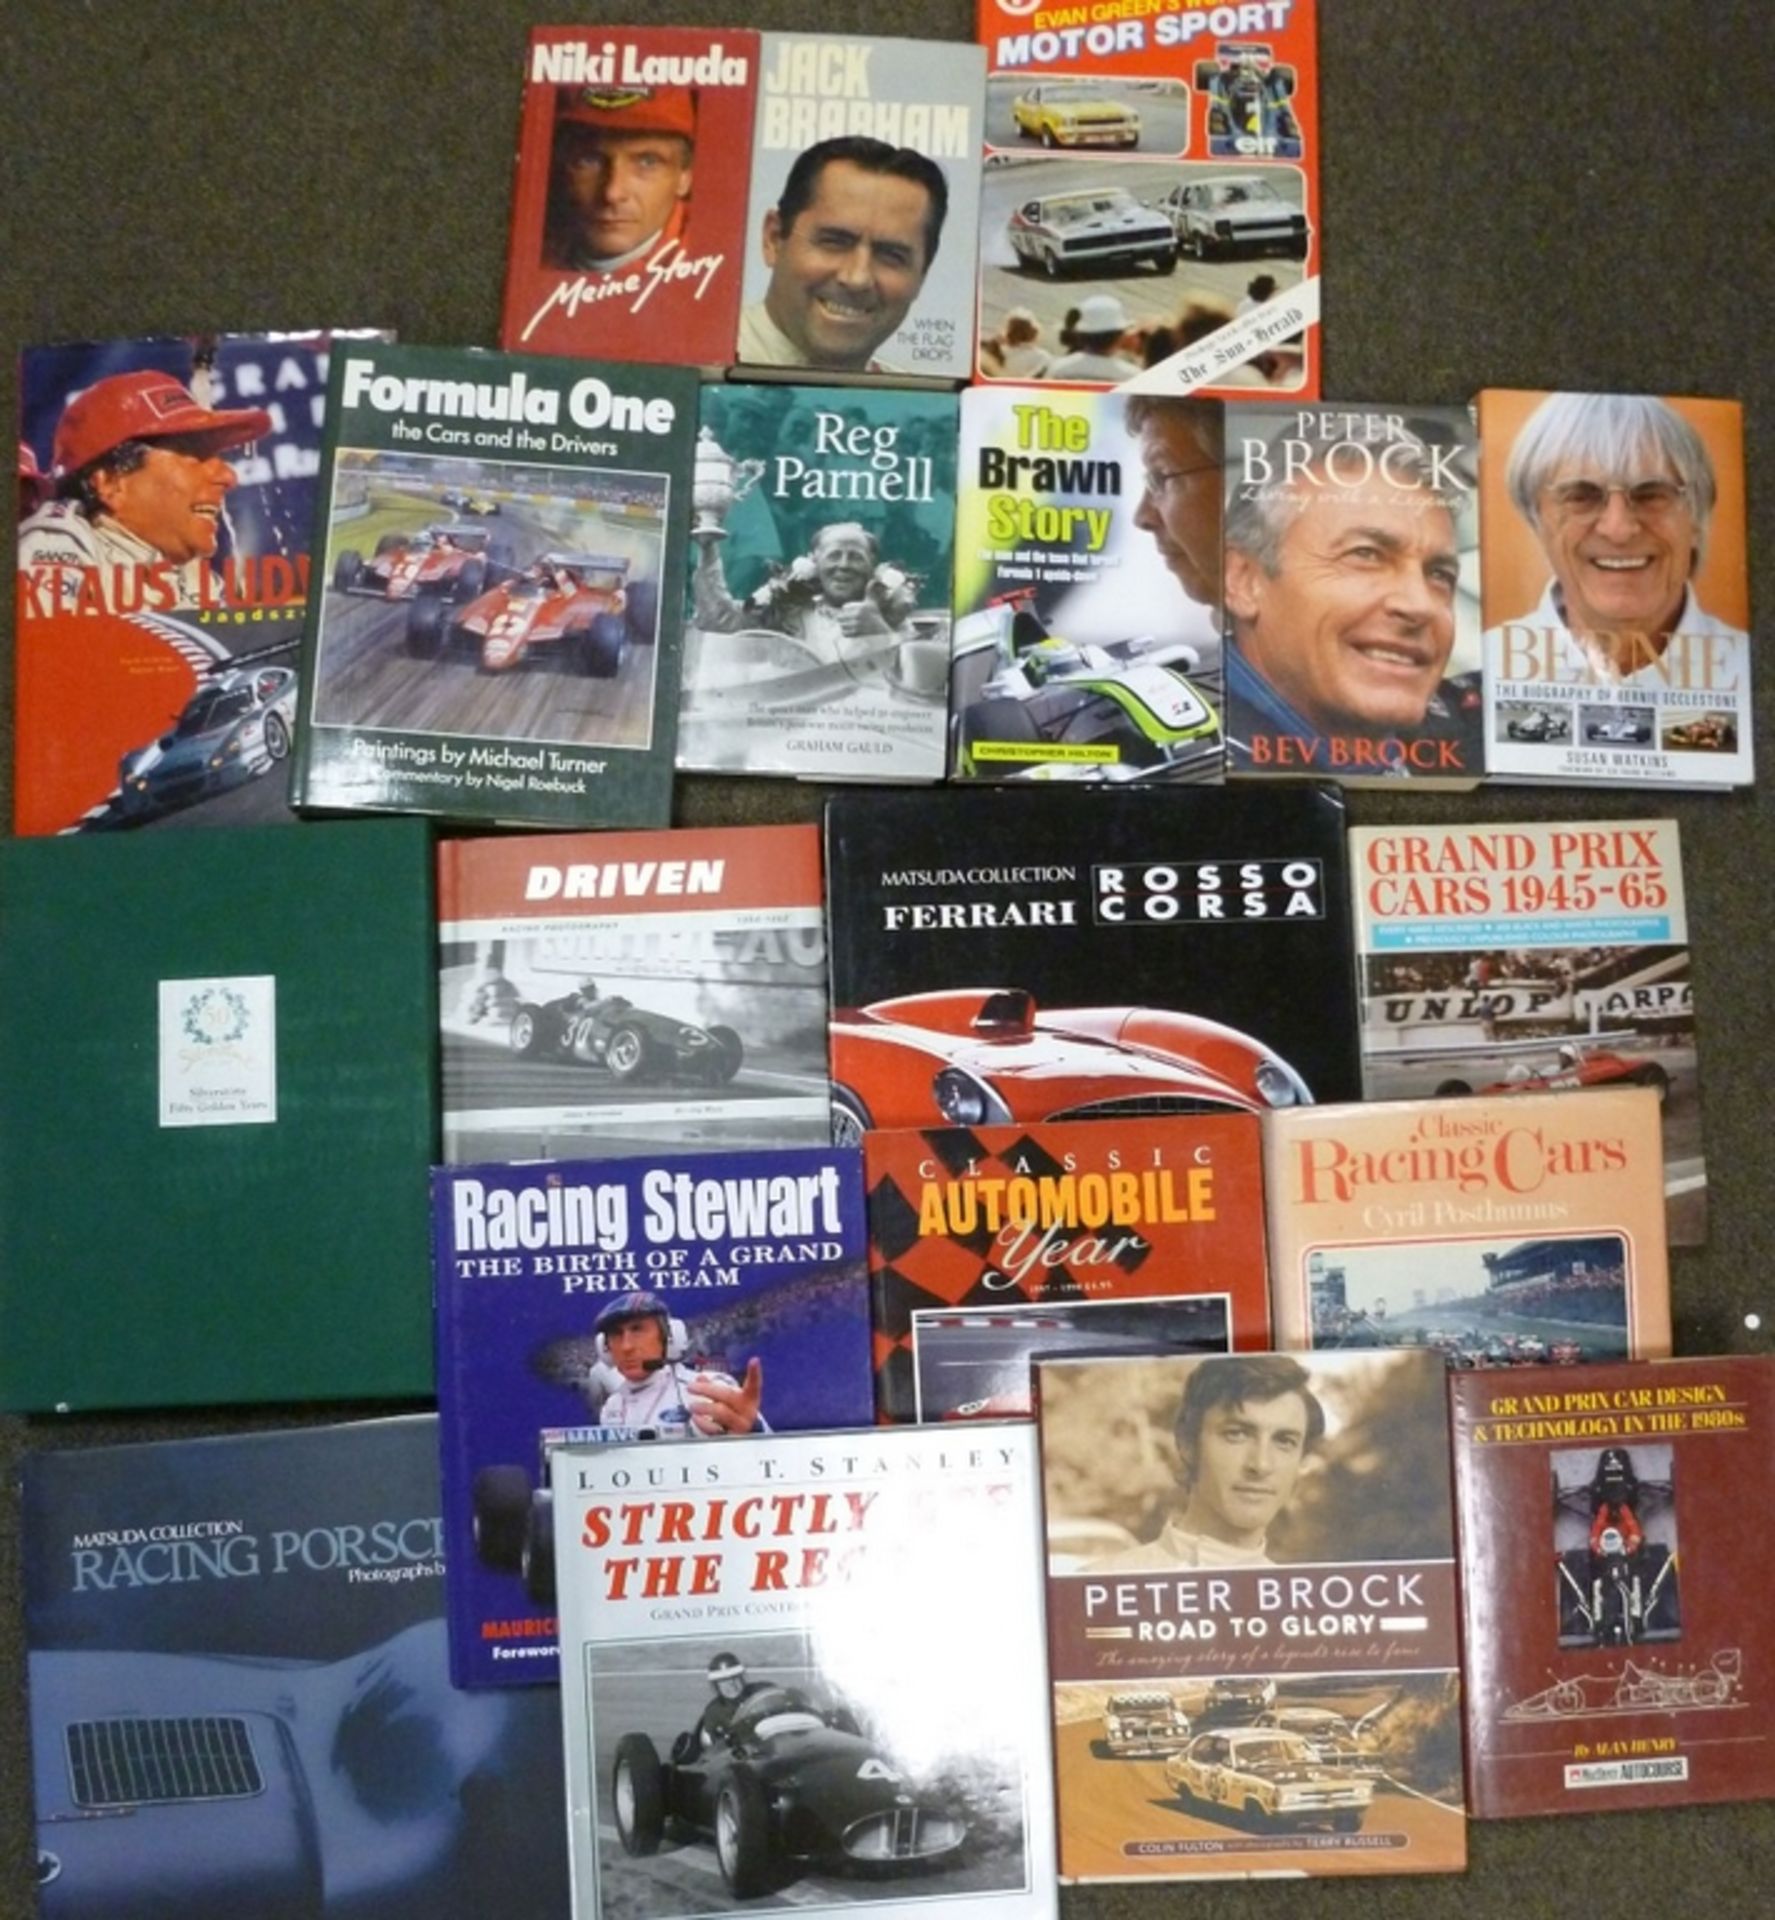 Assorted Motor Racing Books from the John Fitzpatrick Collection.